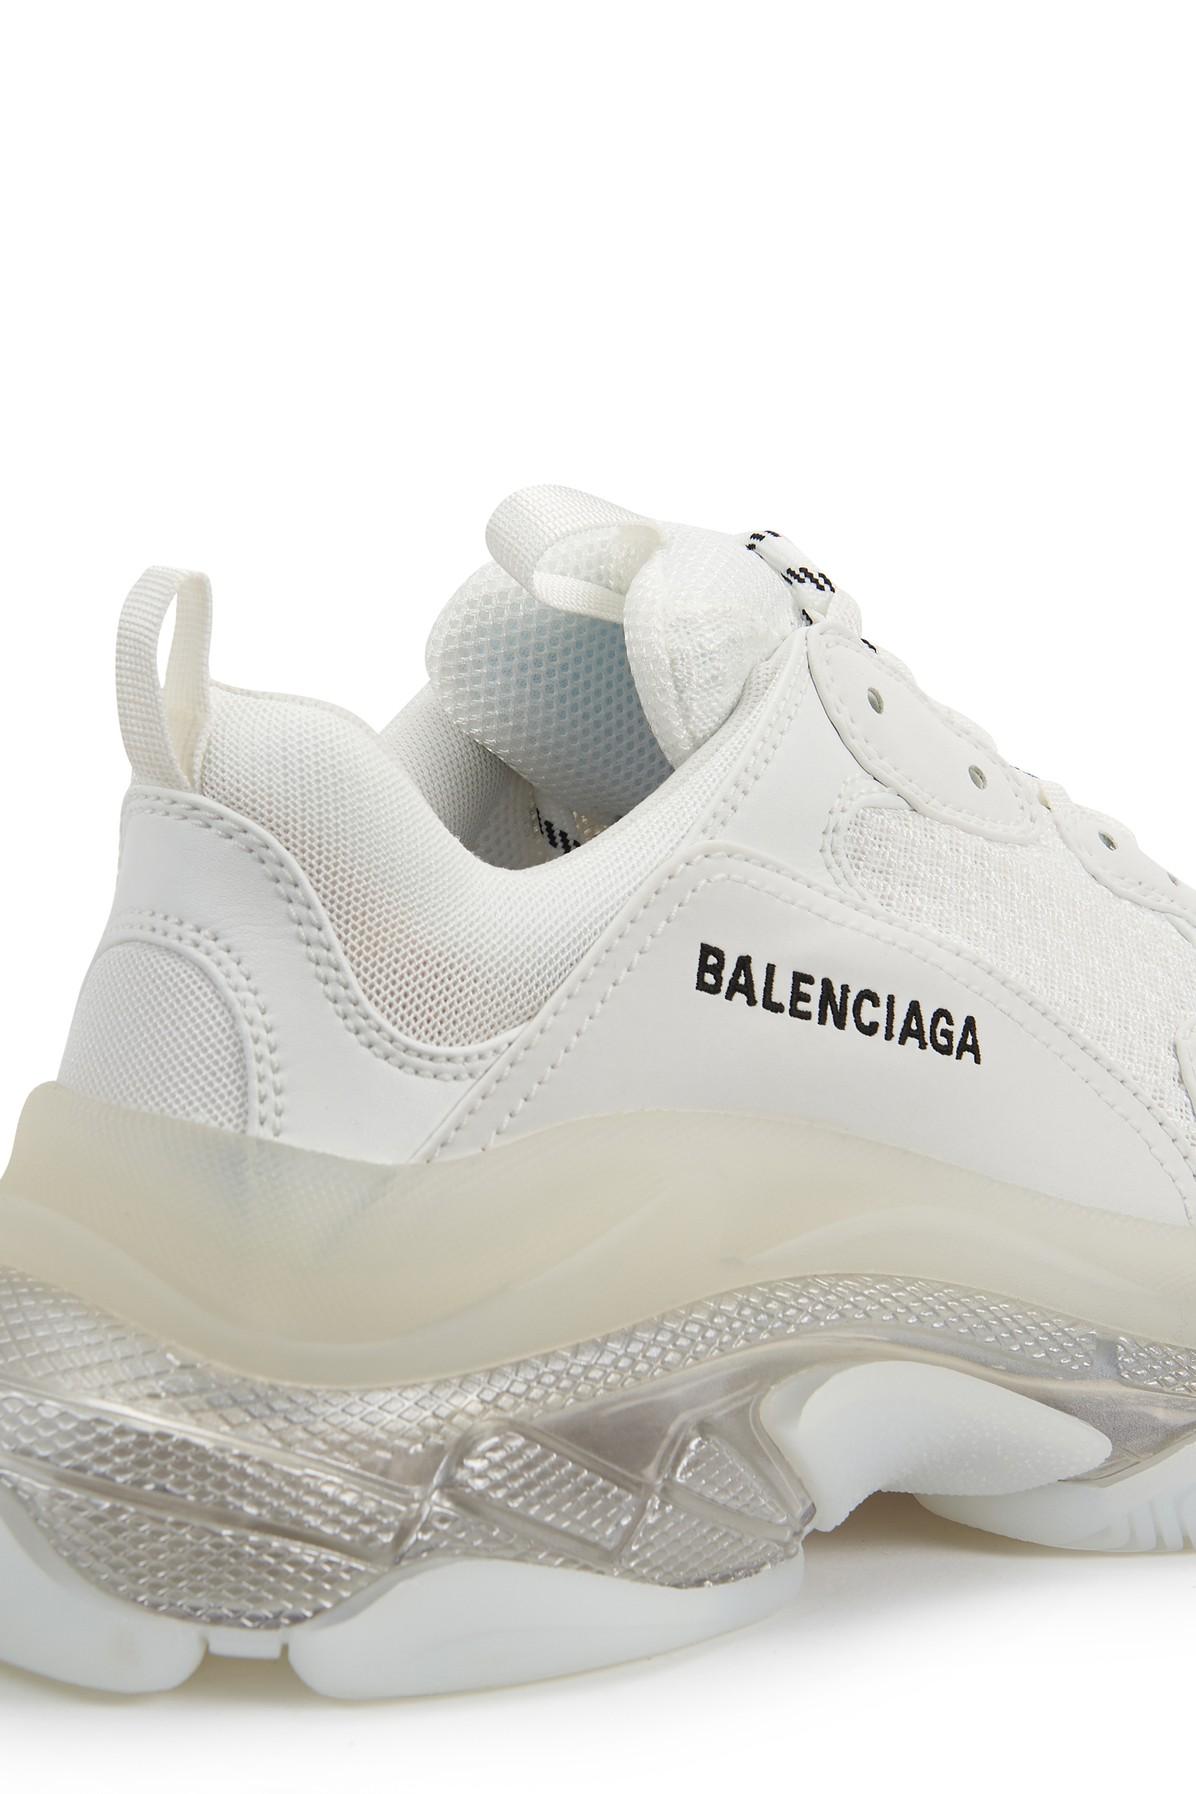 Balenciaga Triple S Clear Sole Sneakers in White_iridescent (White) | Lyst